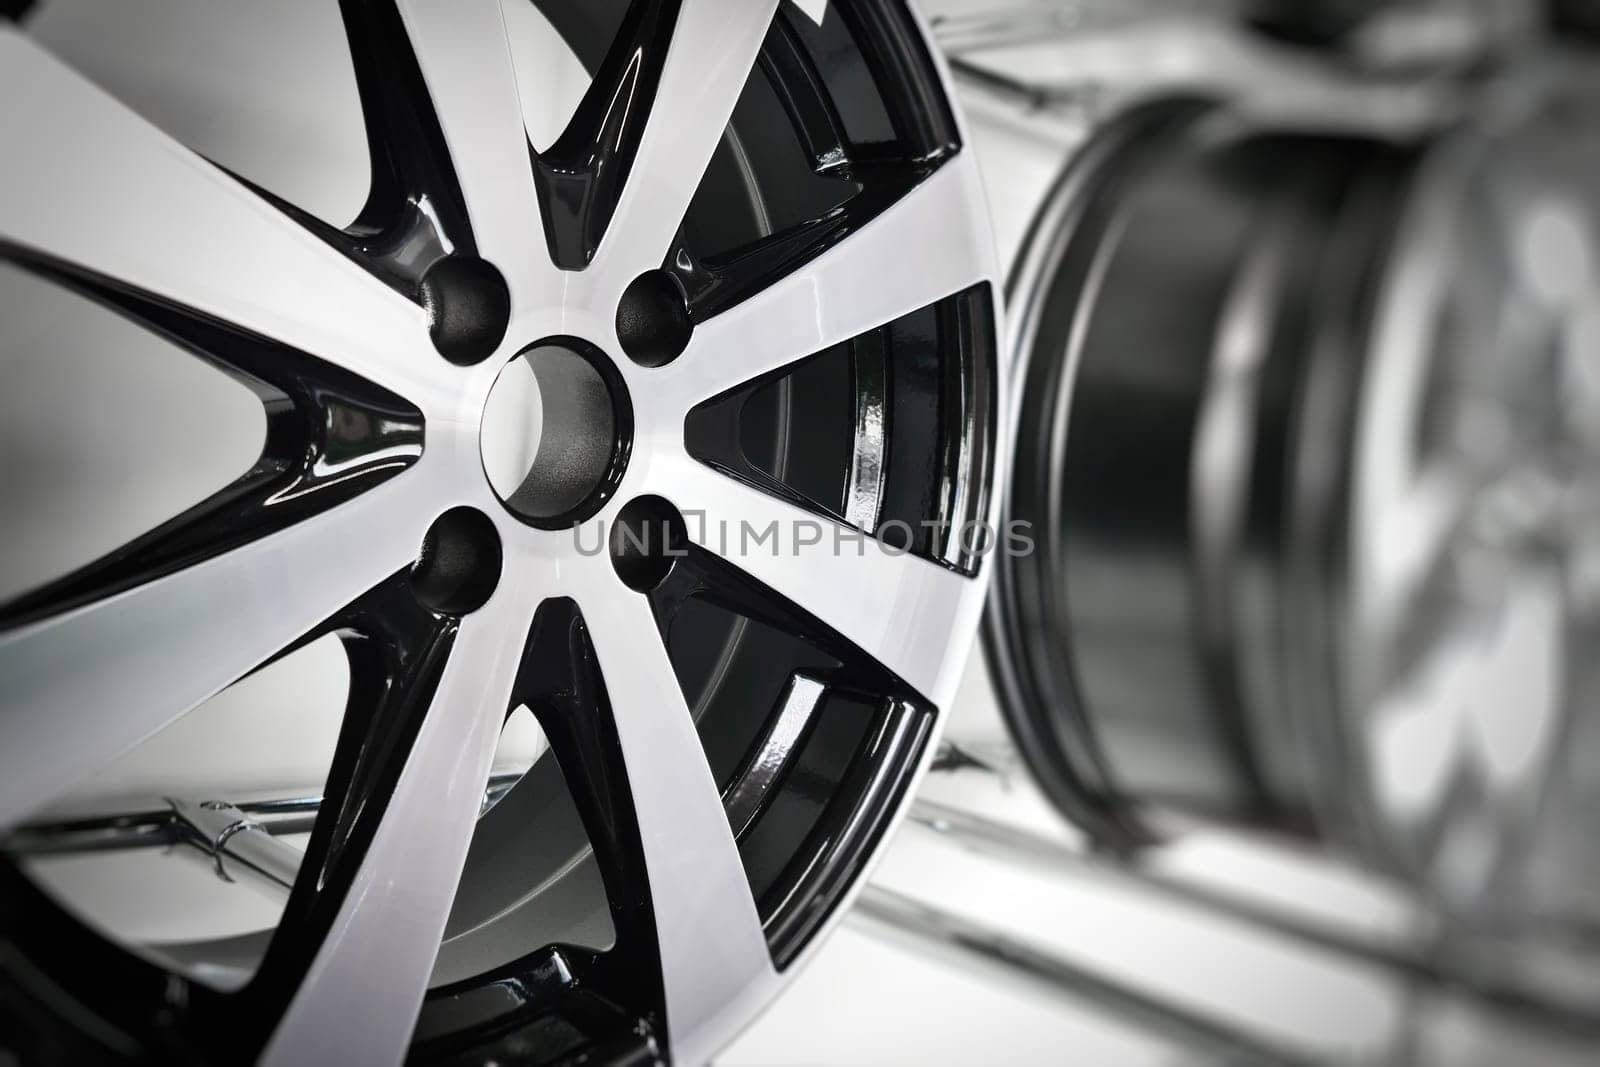 Close-up of light alloy wheels designed for passenger cars on display at a store stand by Rom4ek